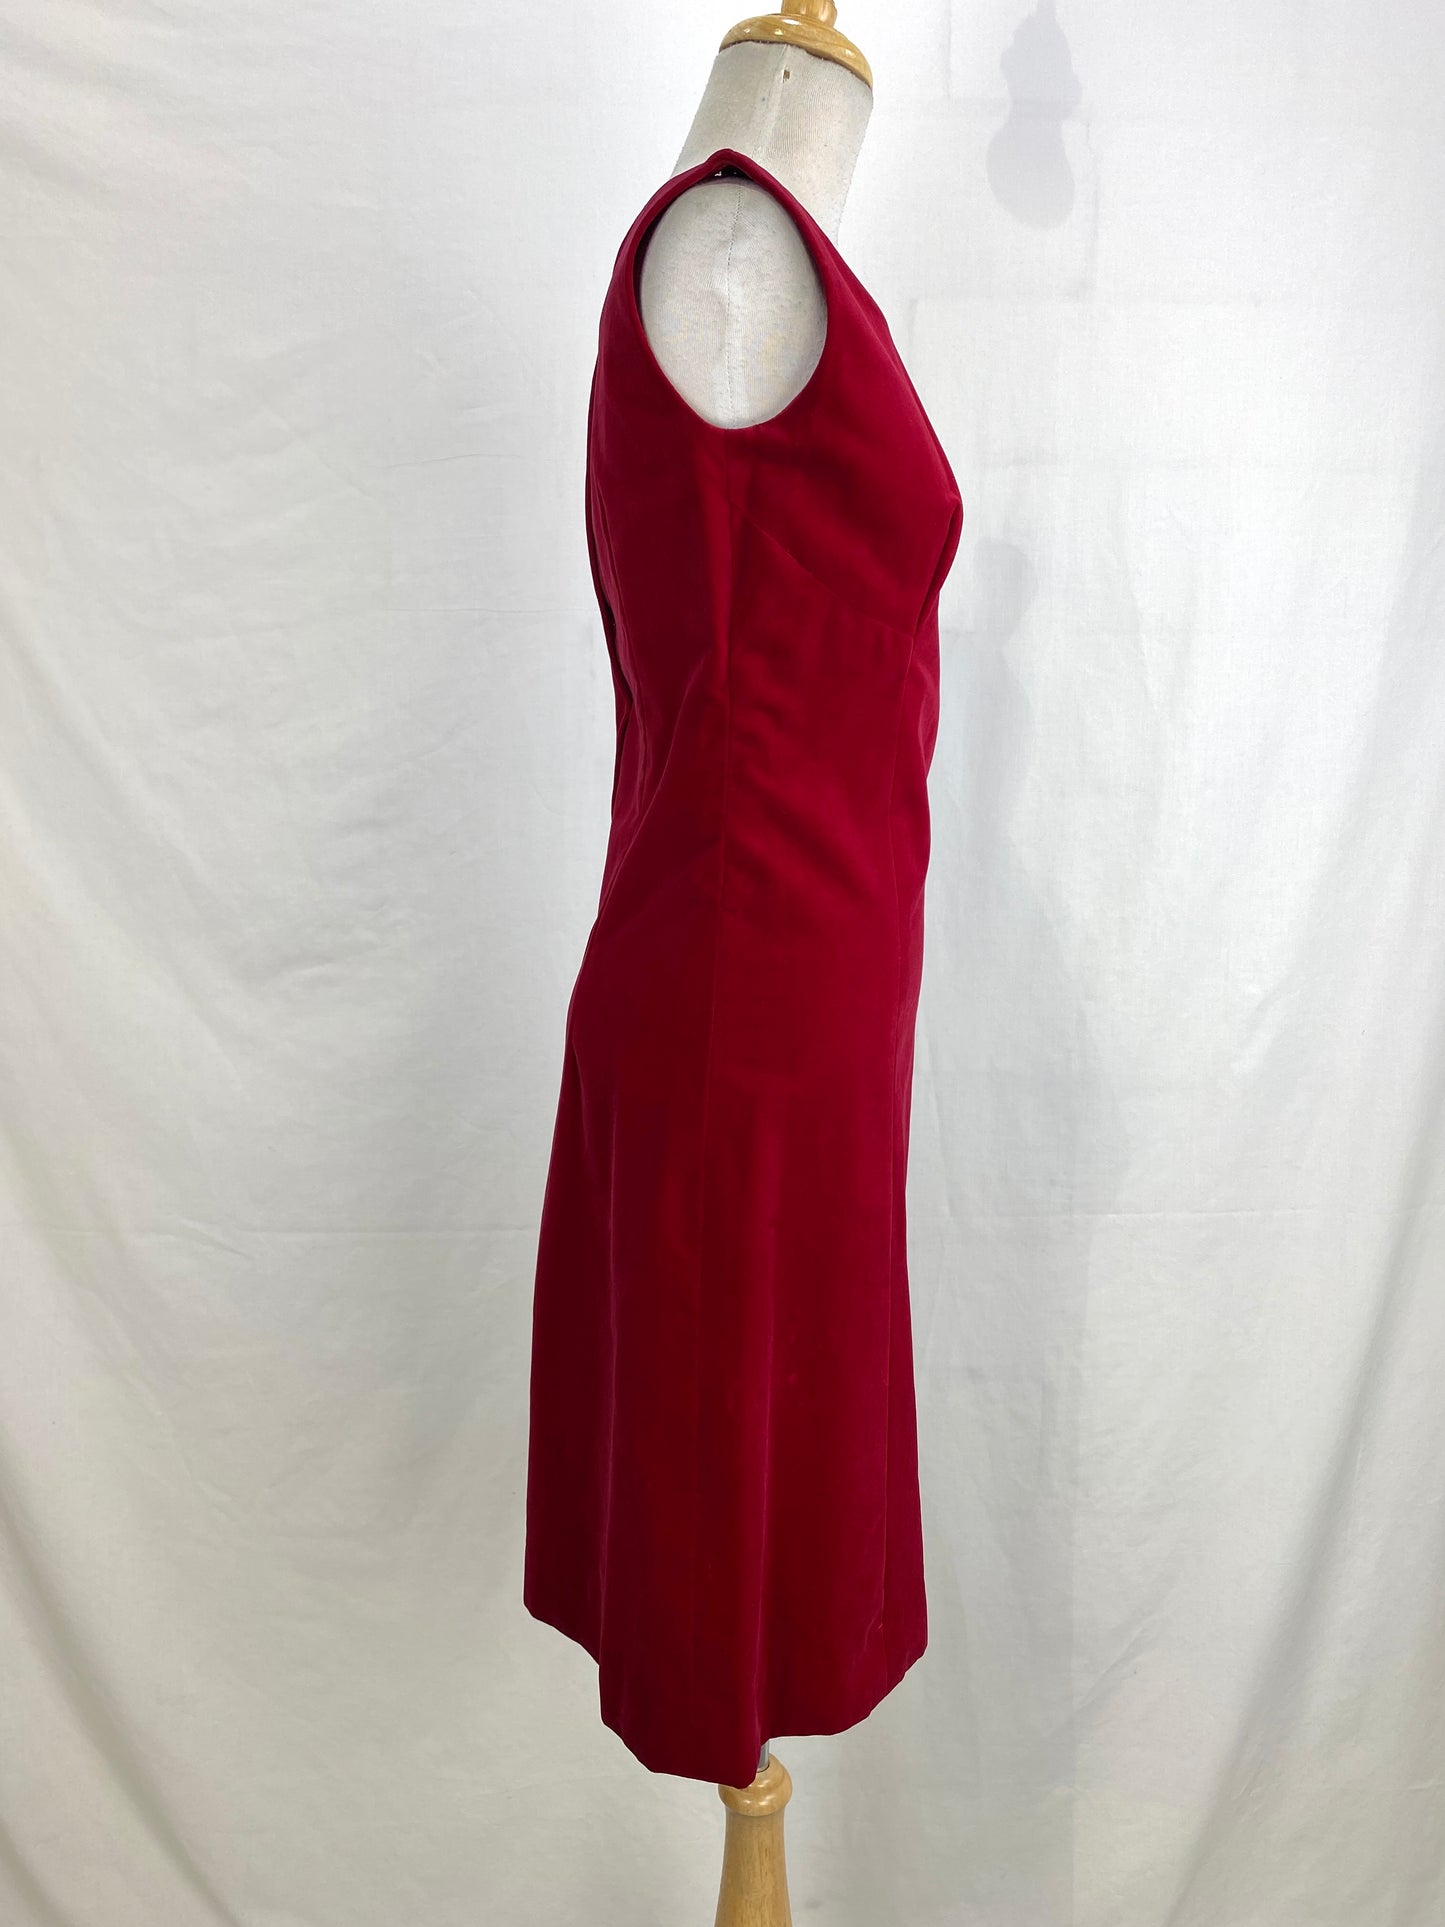 Vintage 1950s Red Velour Shift Dress, Small